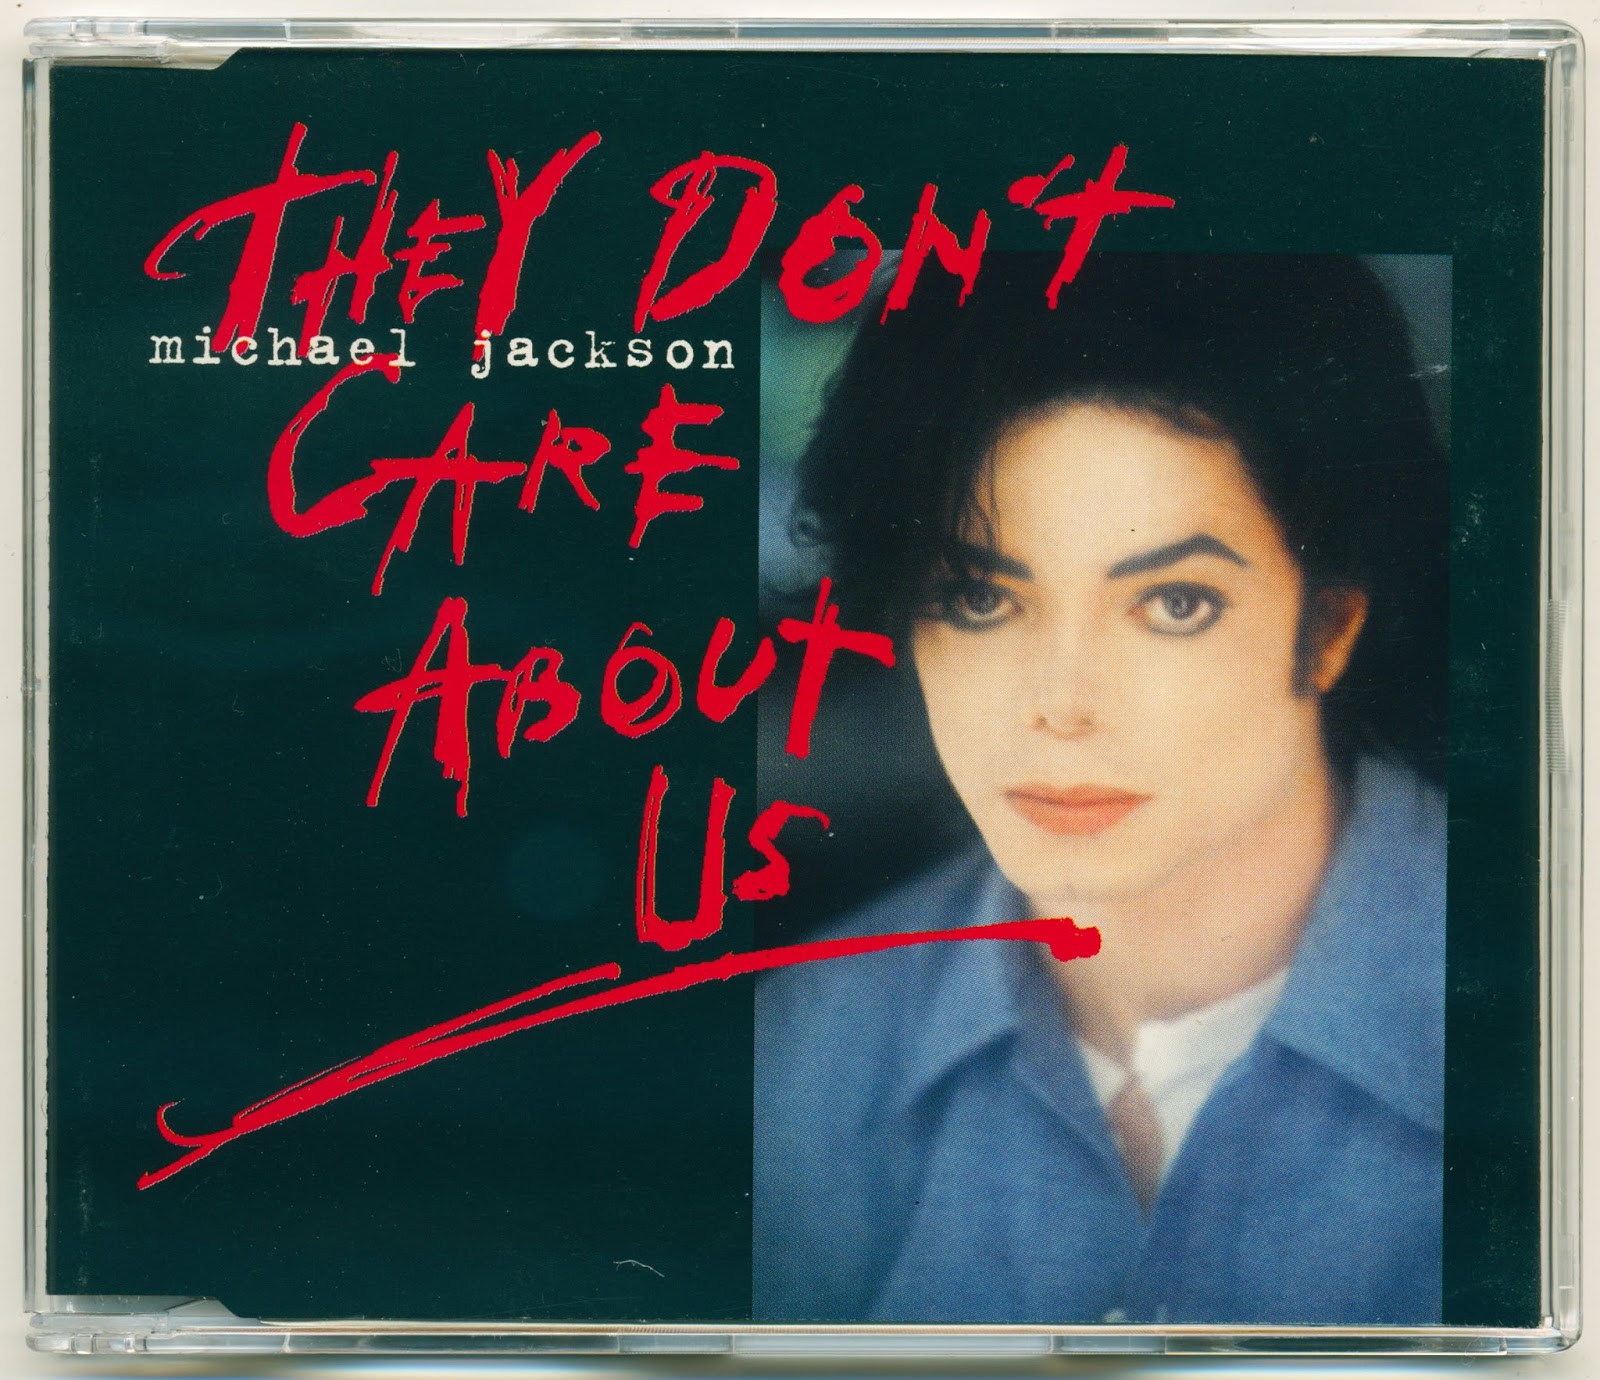 Don t care about us текст. Michael Jackson сингл. They don't Care about us Michael Jackson альбом.